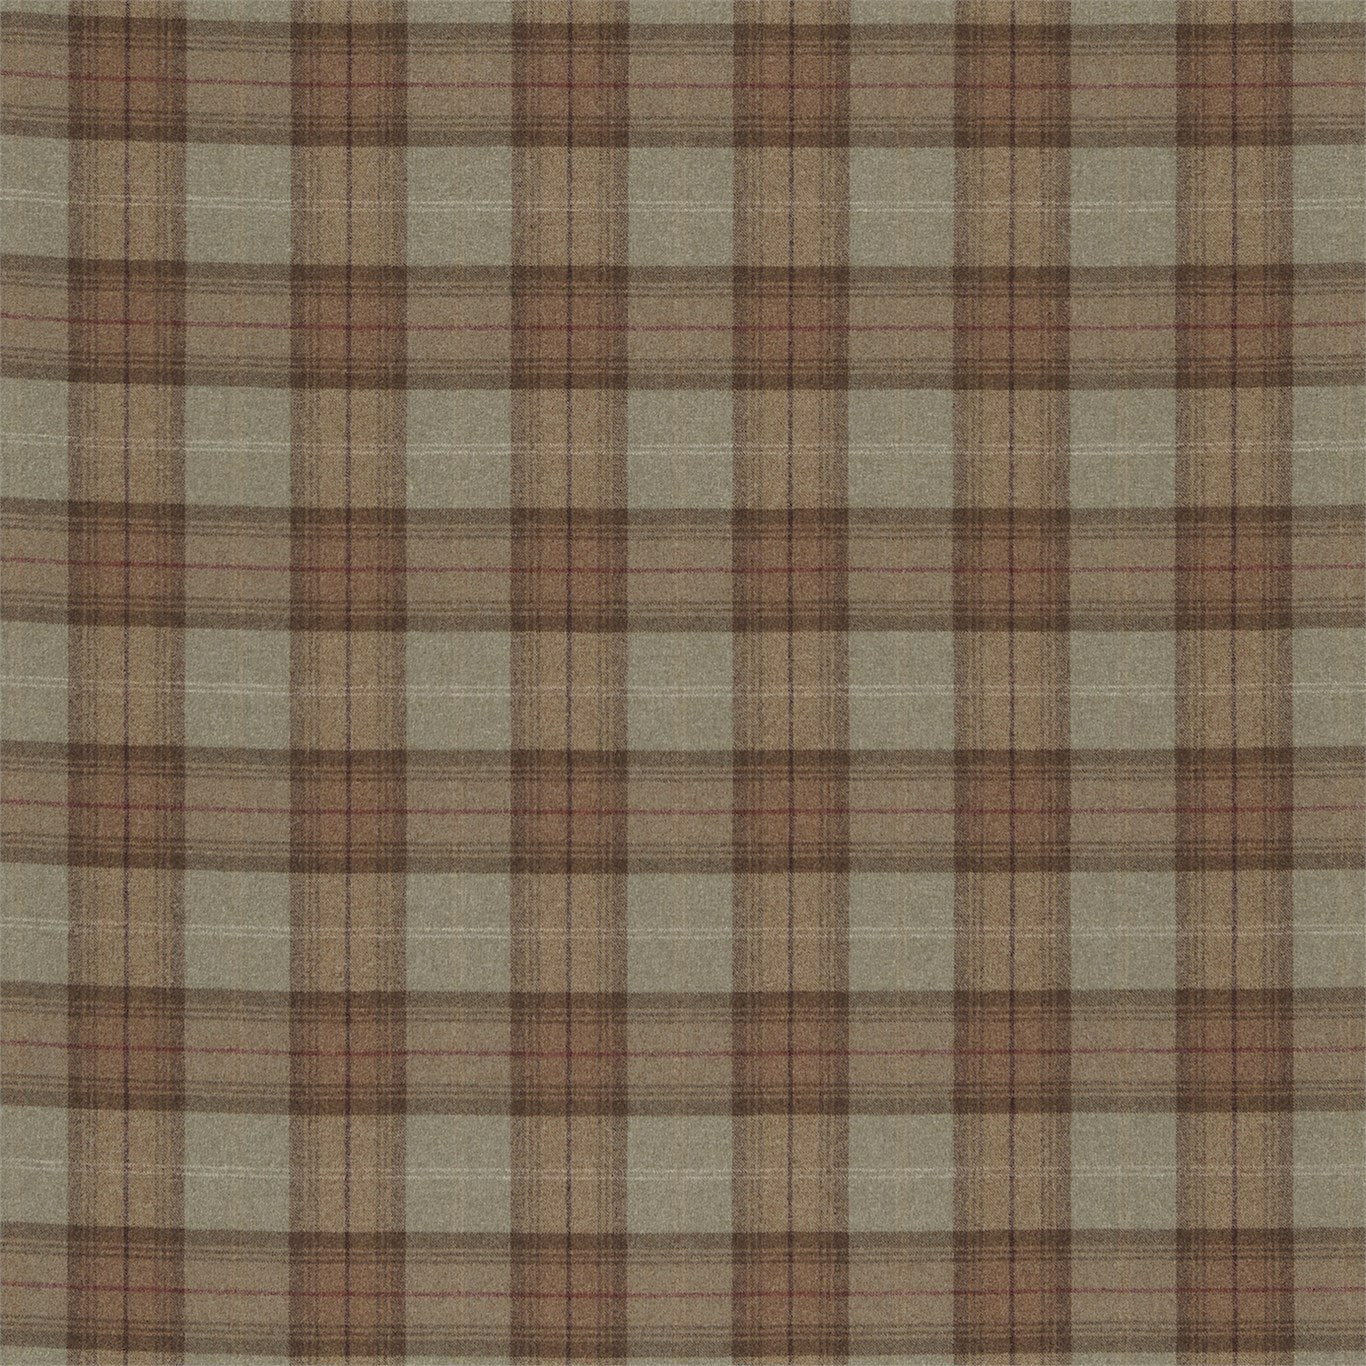 Woodford Plaid Fabric by Morris & Co.